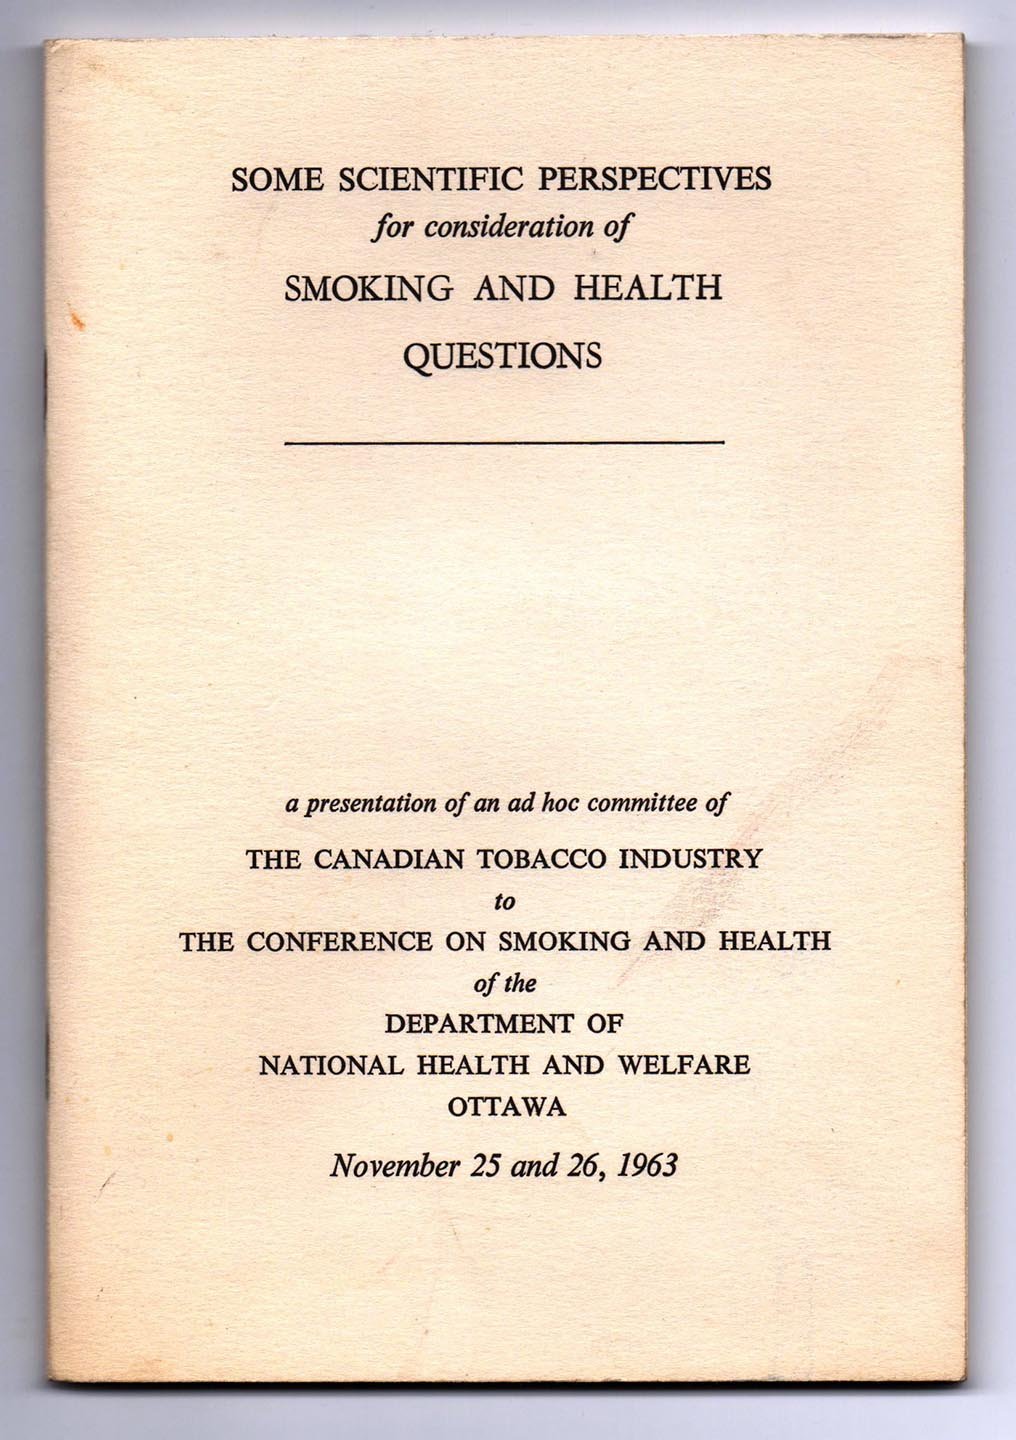 Some Scientific Perspectives for consideration of Smoking and Health Questions